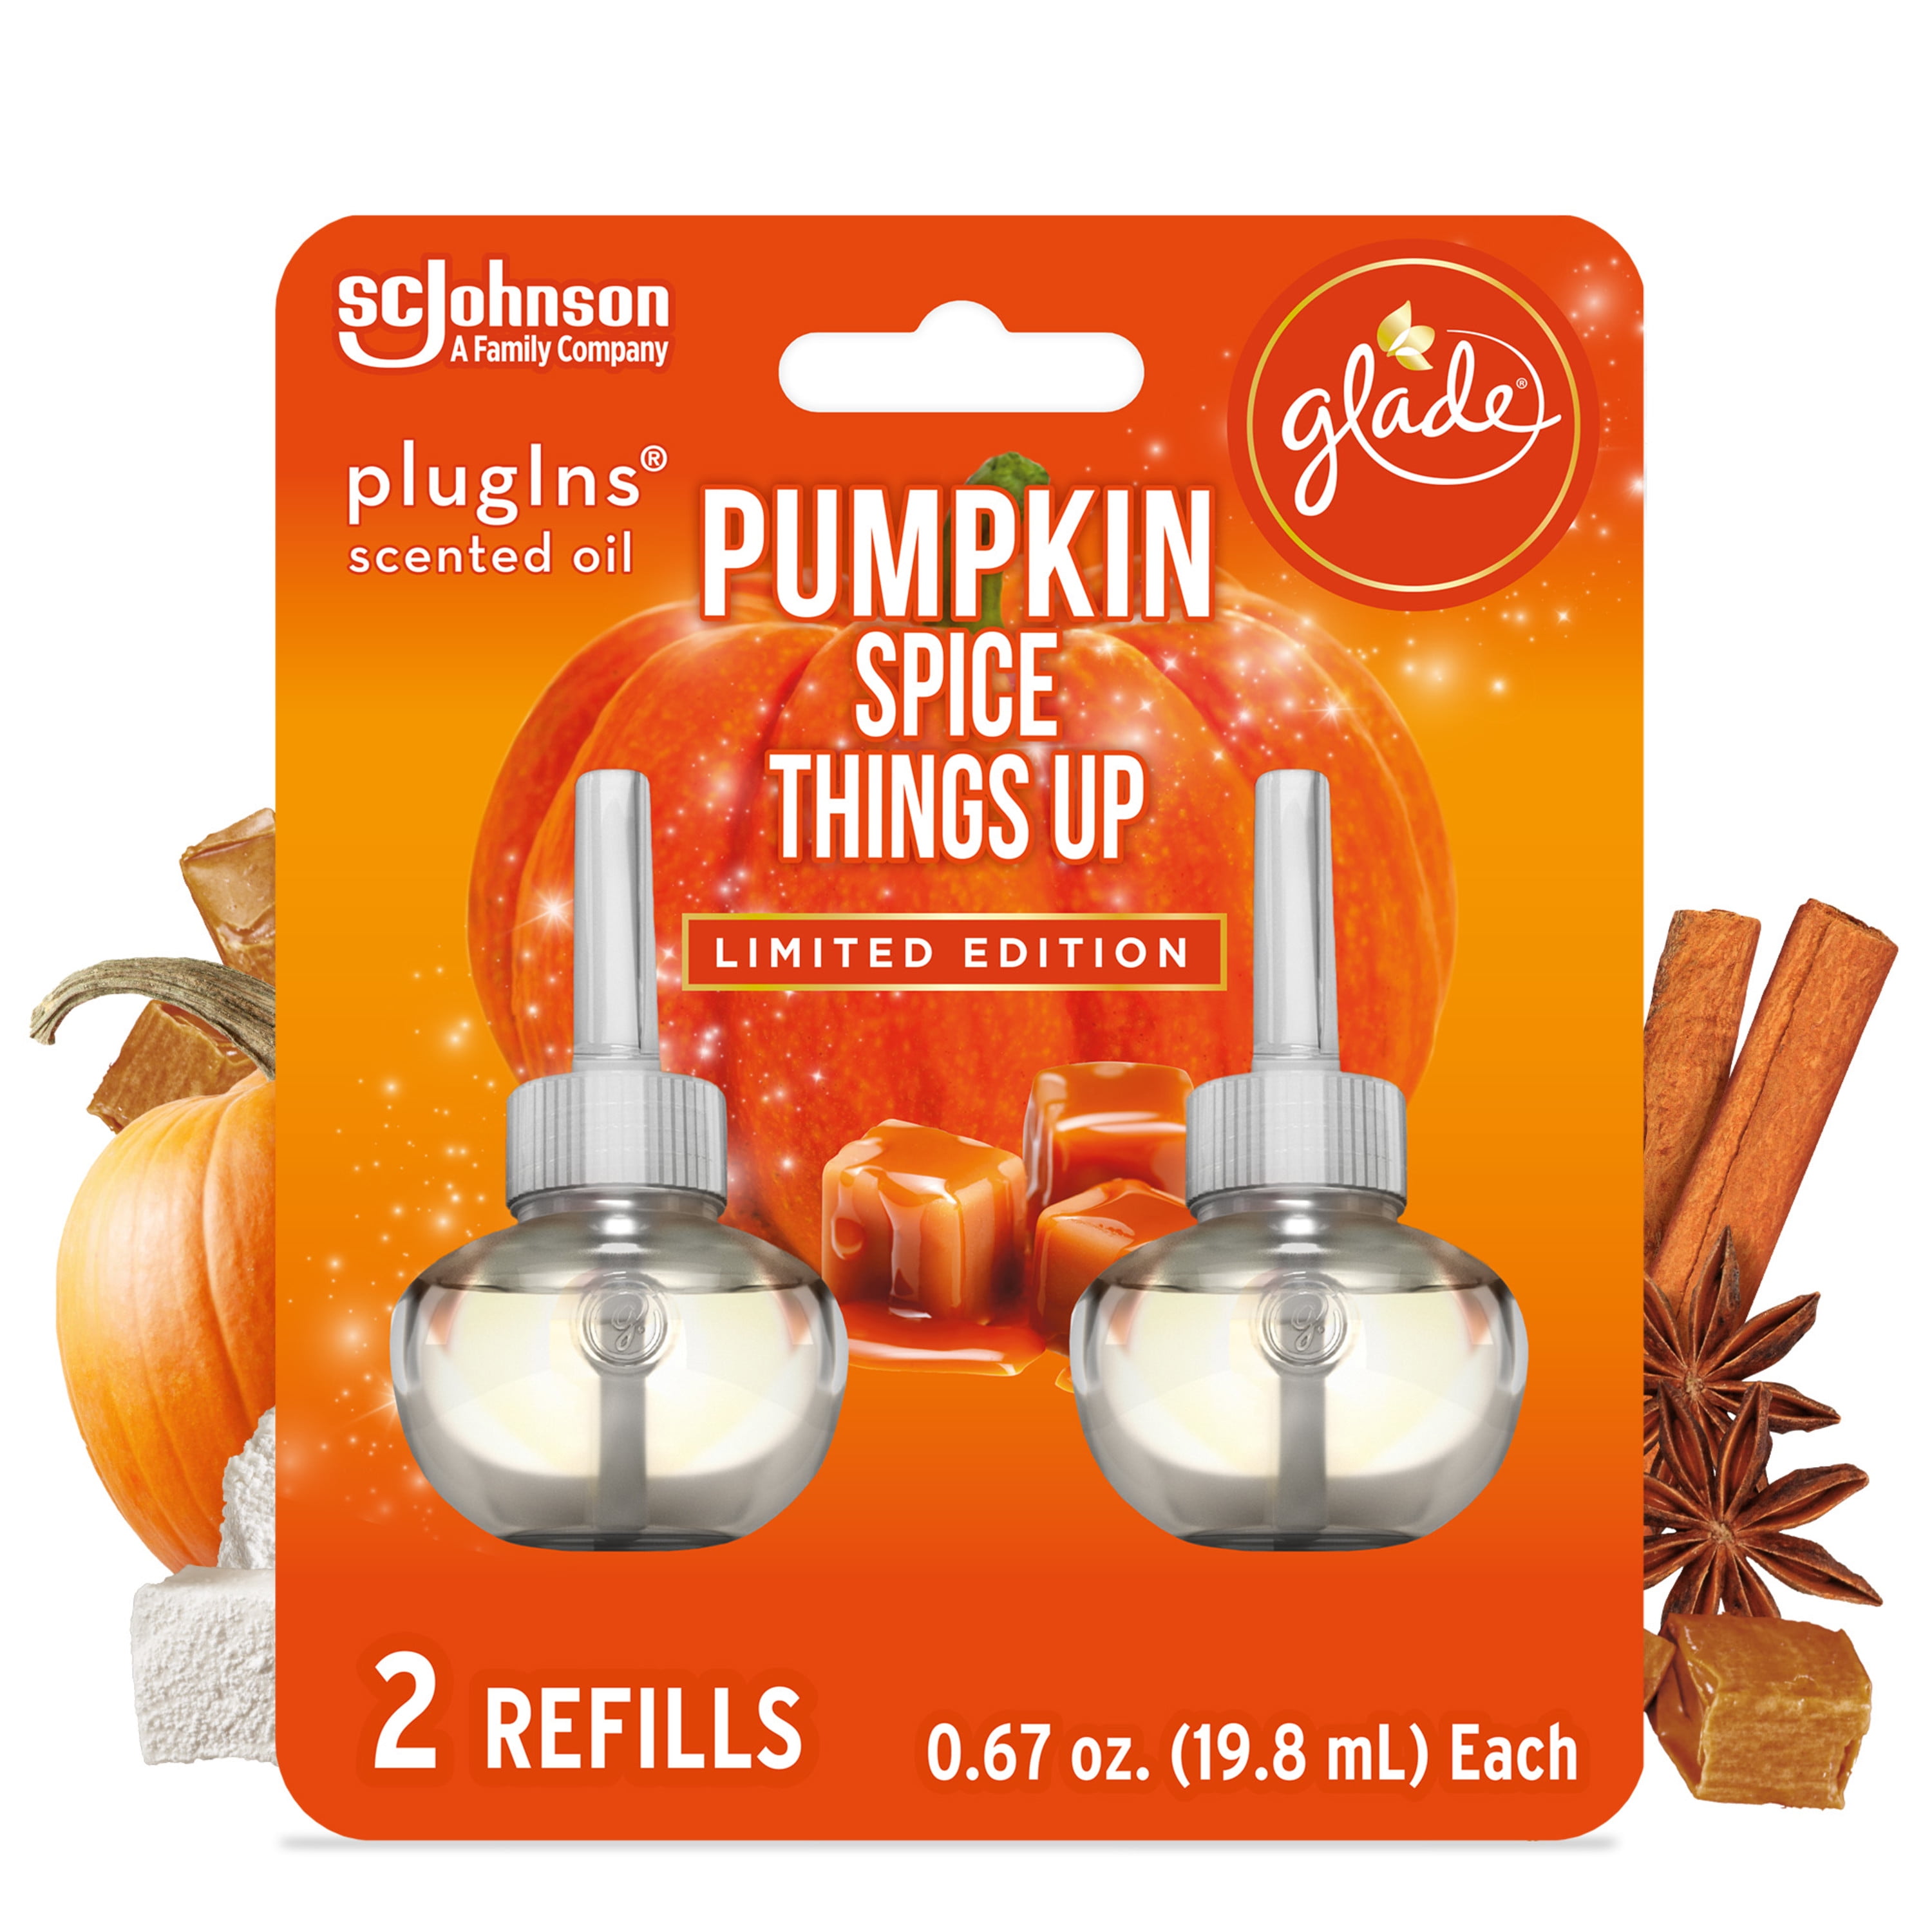 Glade PlugIns Refill 2 CT, Pumpkin Spice Things Up, 1.34 FL. OZ. Total, Scented Oil Air Freshener Infused with Essential Oils